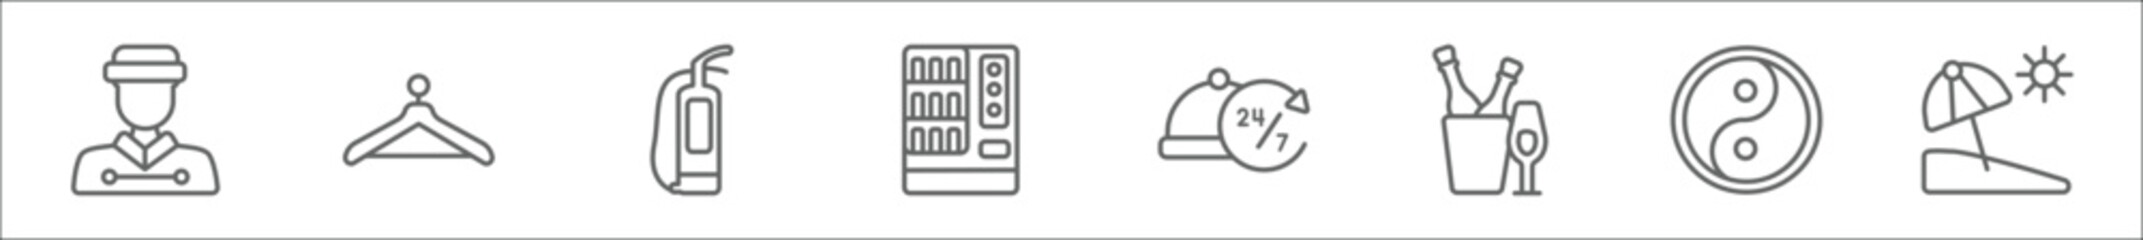 outline set of accommodation line icons. linear vector icons such as bellboy, hanger, fire extinguisher, vending hine, 24 service, champagne, yin yang, beach umbrella